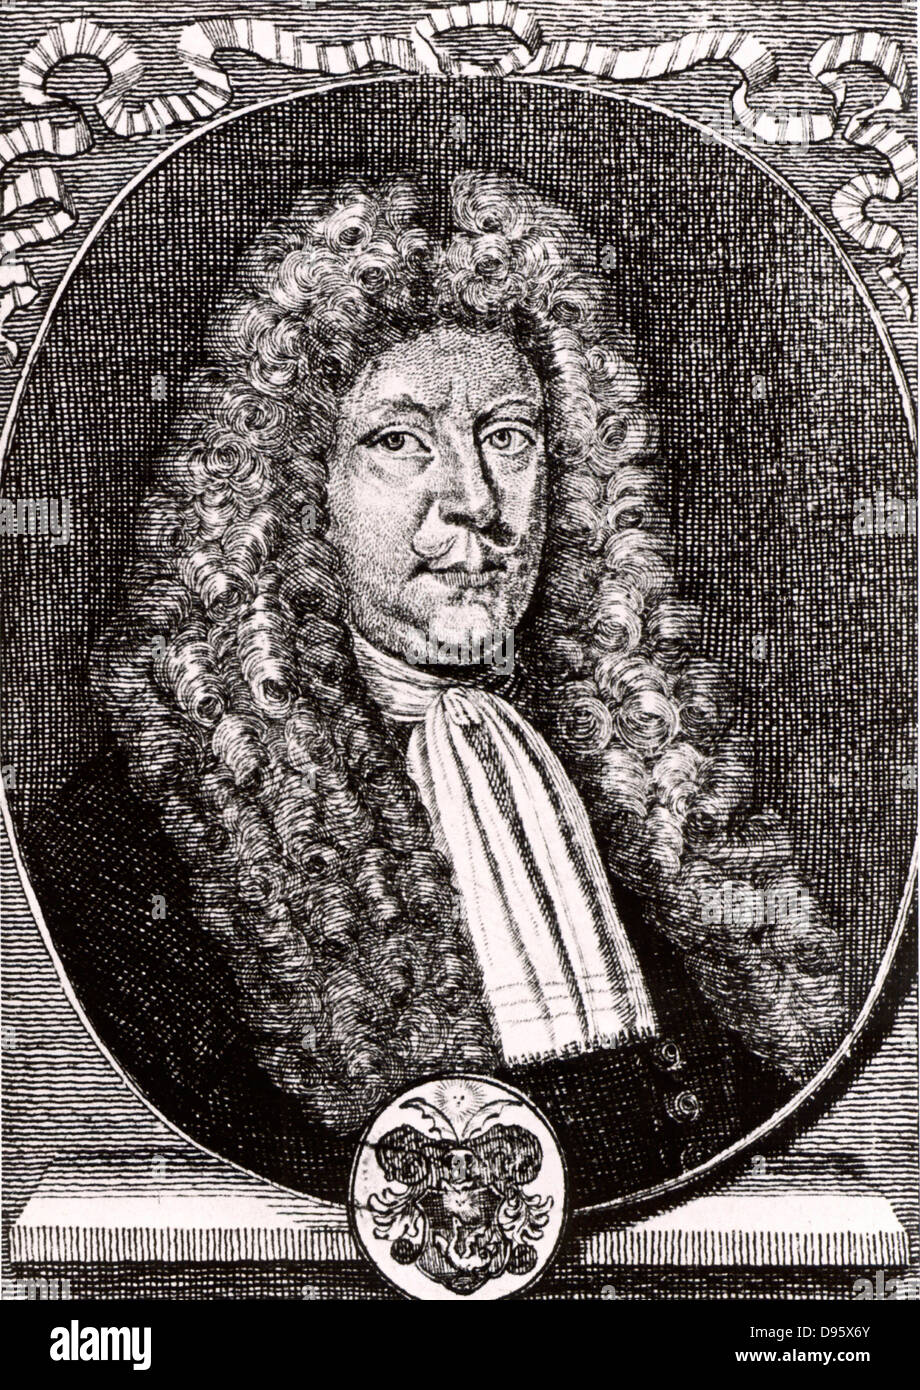 Olaus Borrichius or Ole or Olug Borch (1626-1690) Dutch chemist and alchemist.  Engraving from From 'Icones Virorum' by Friedrich Roth-Scholtz (Nuremberg, 1725). Stock Photo